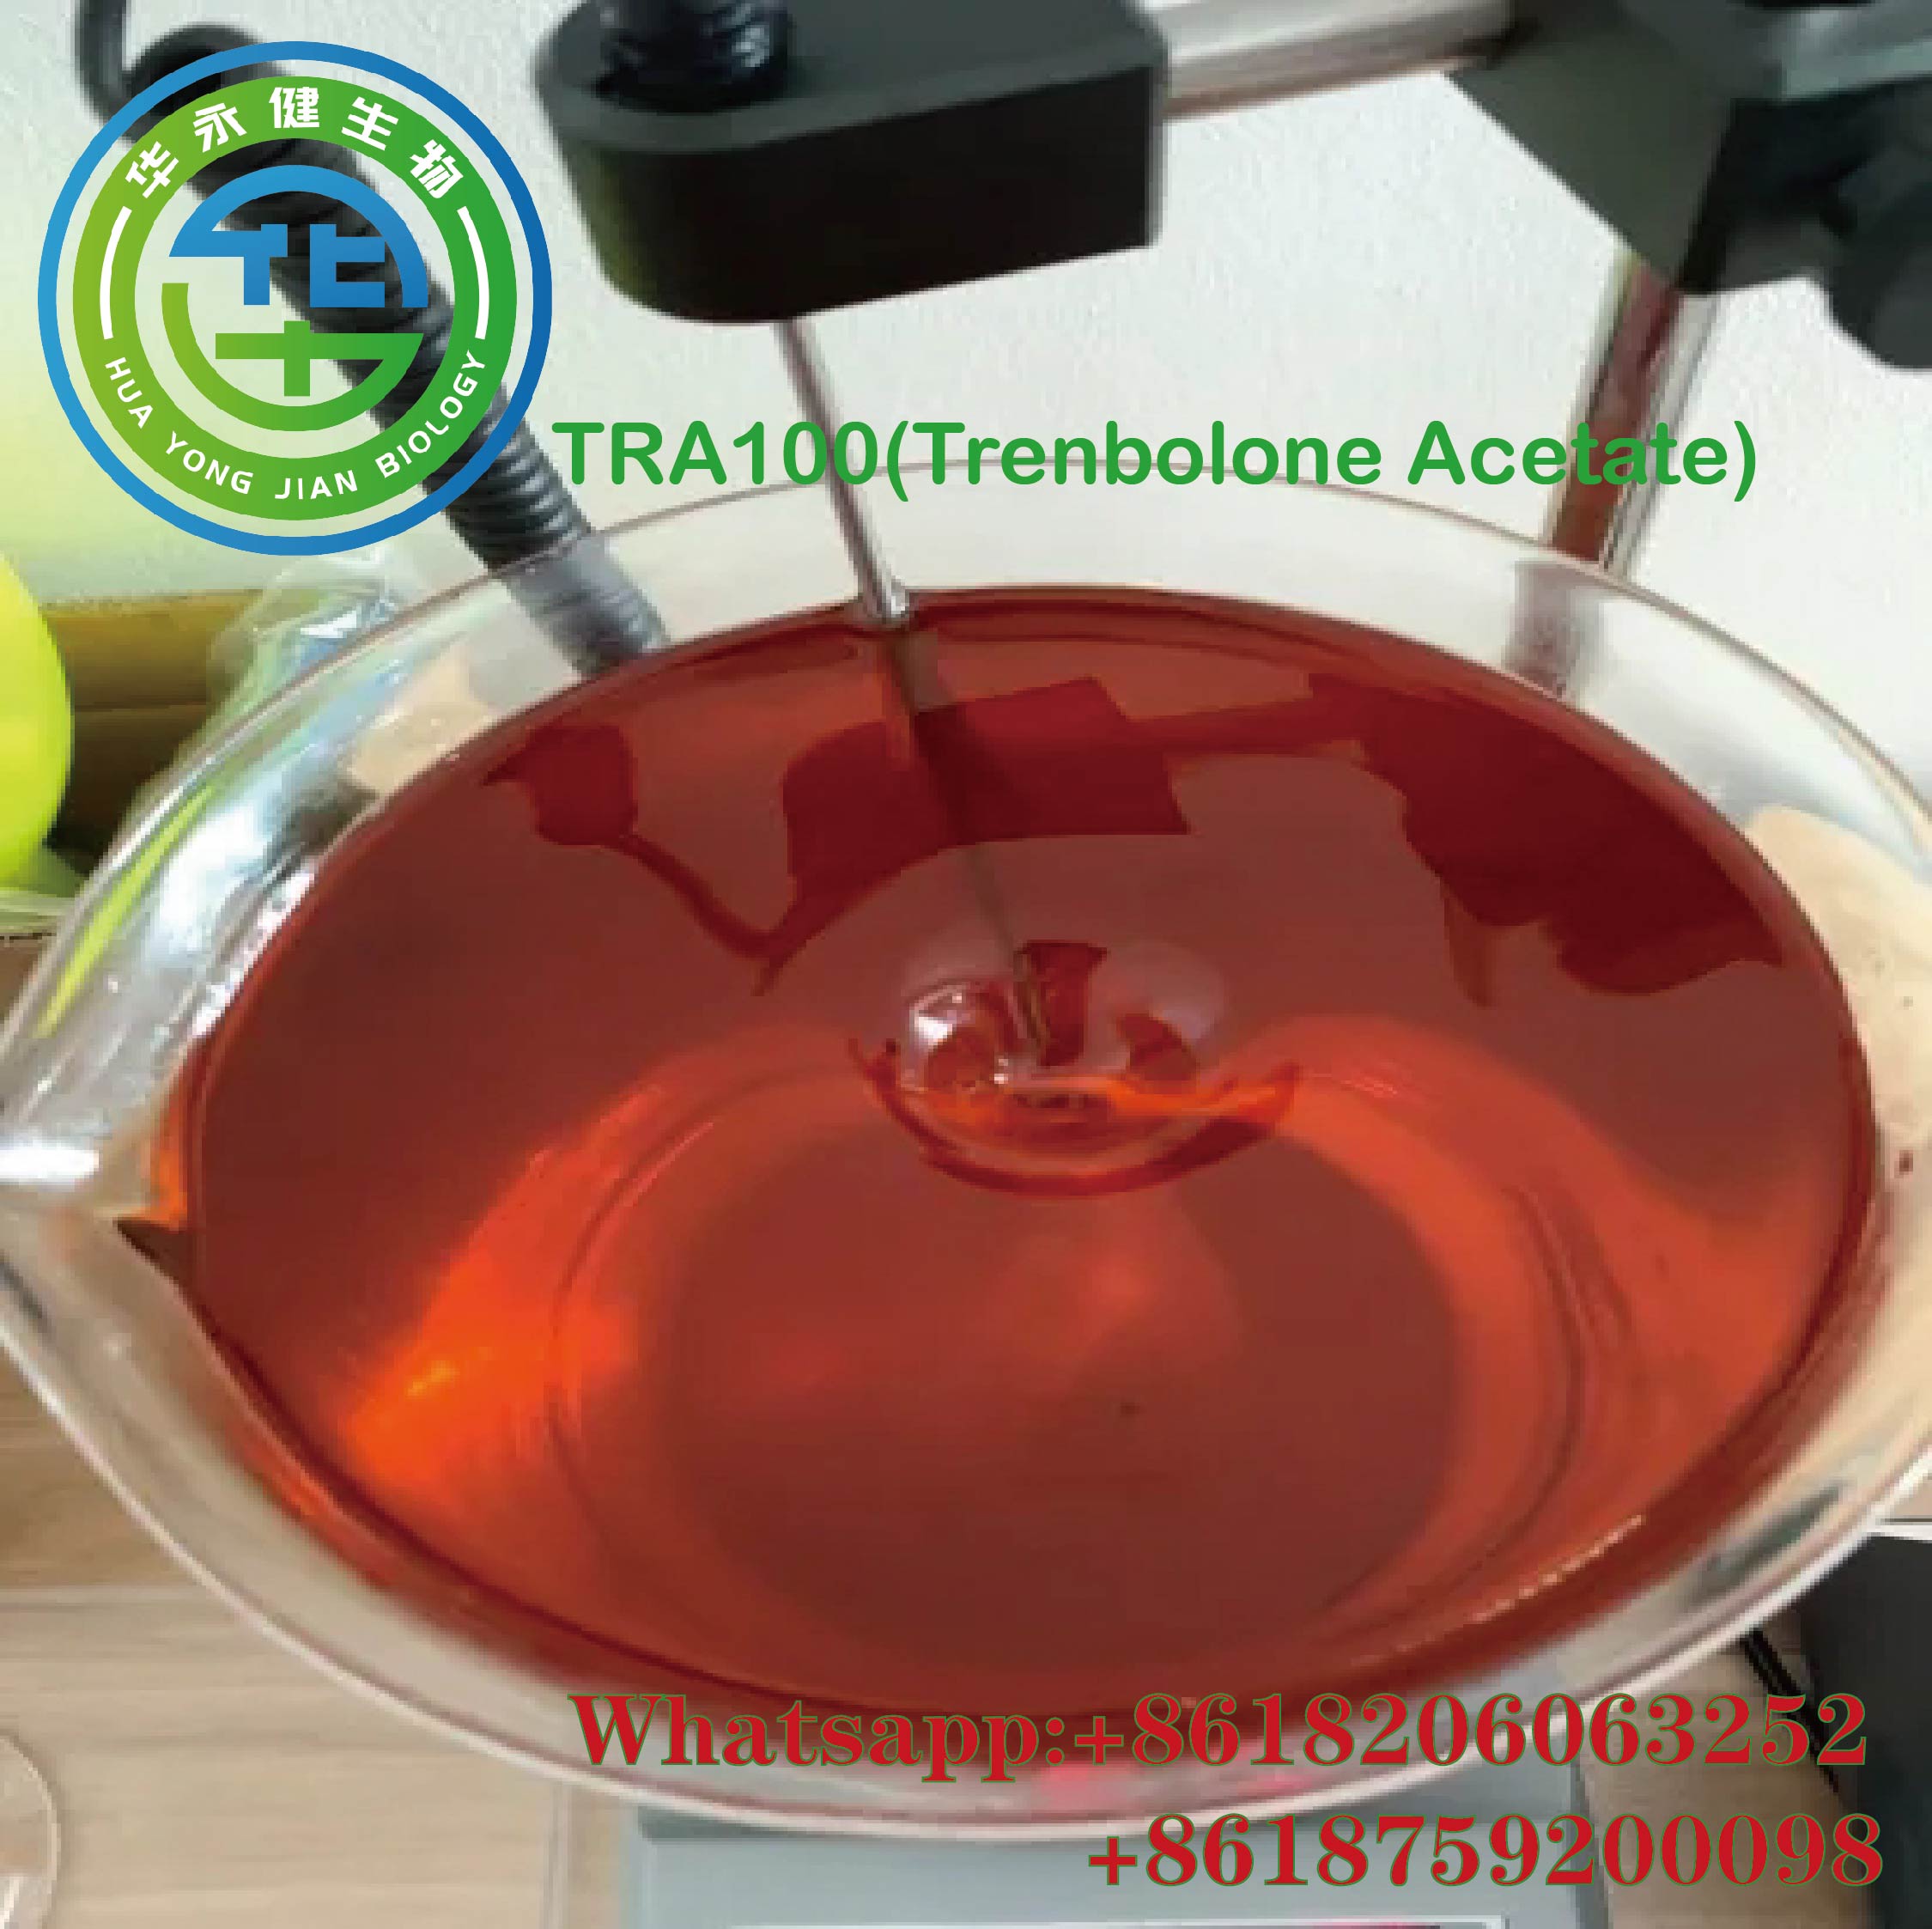 Trenbolone Acetate 100mg/ml Injecting Anabolic Steroids Semi - Finished TRA100 For Bodybuilding